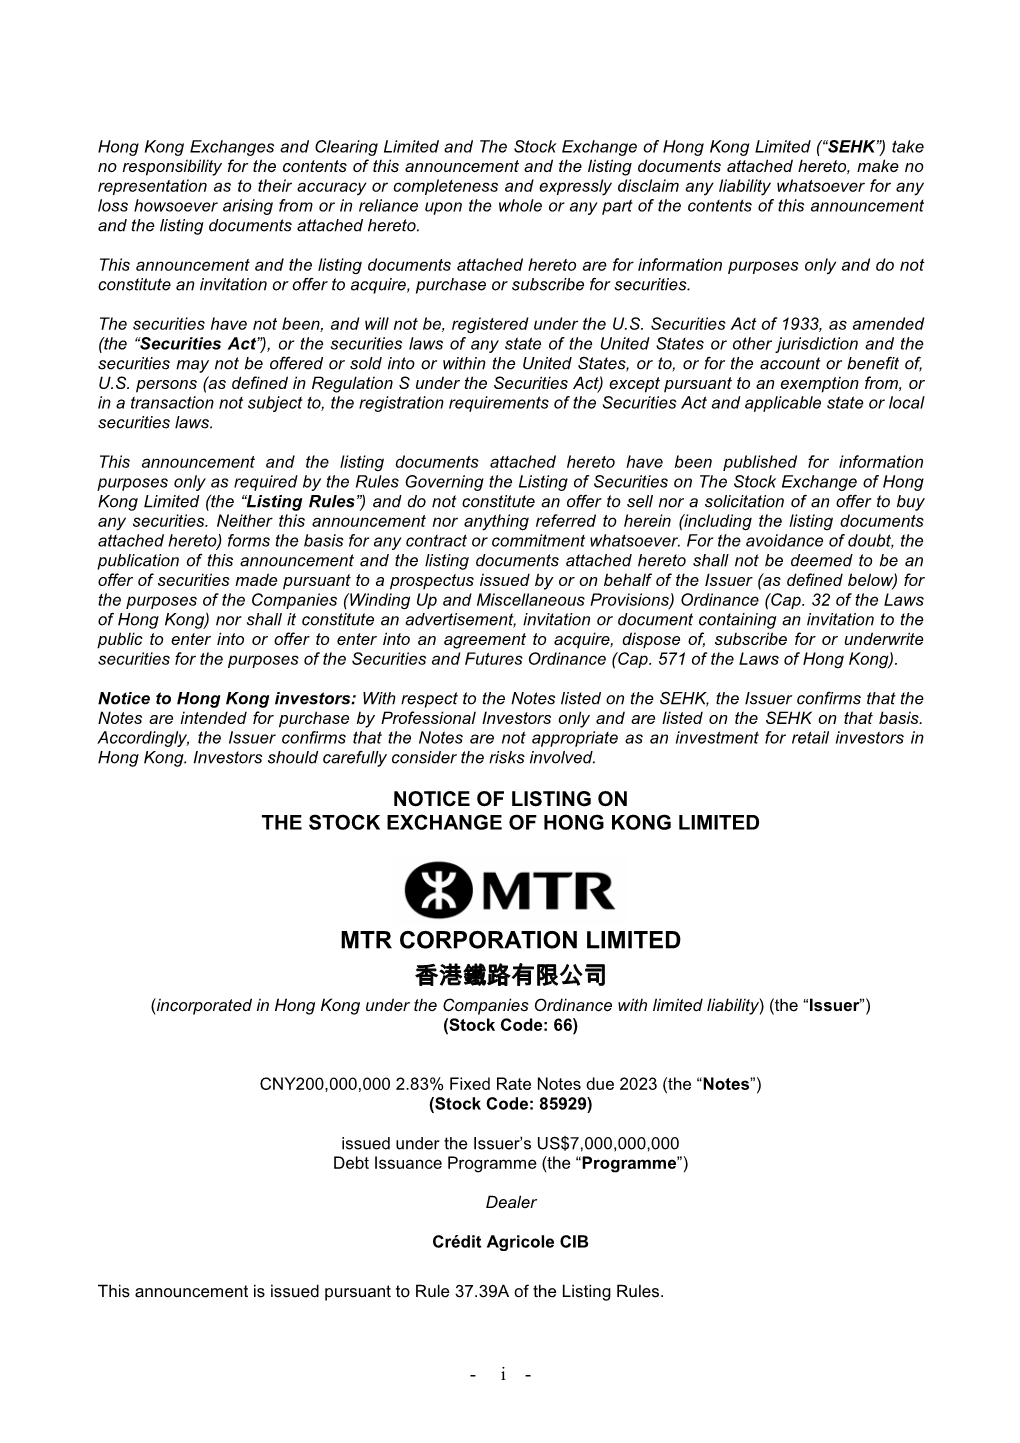 MTR CORPORATION LIMITED 香港鐵路有限公司 (Incorporated in Hong Kong Under the Companies Ordinance with Limited Liability) (The “Issuer”) (Stock Code: 66)